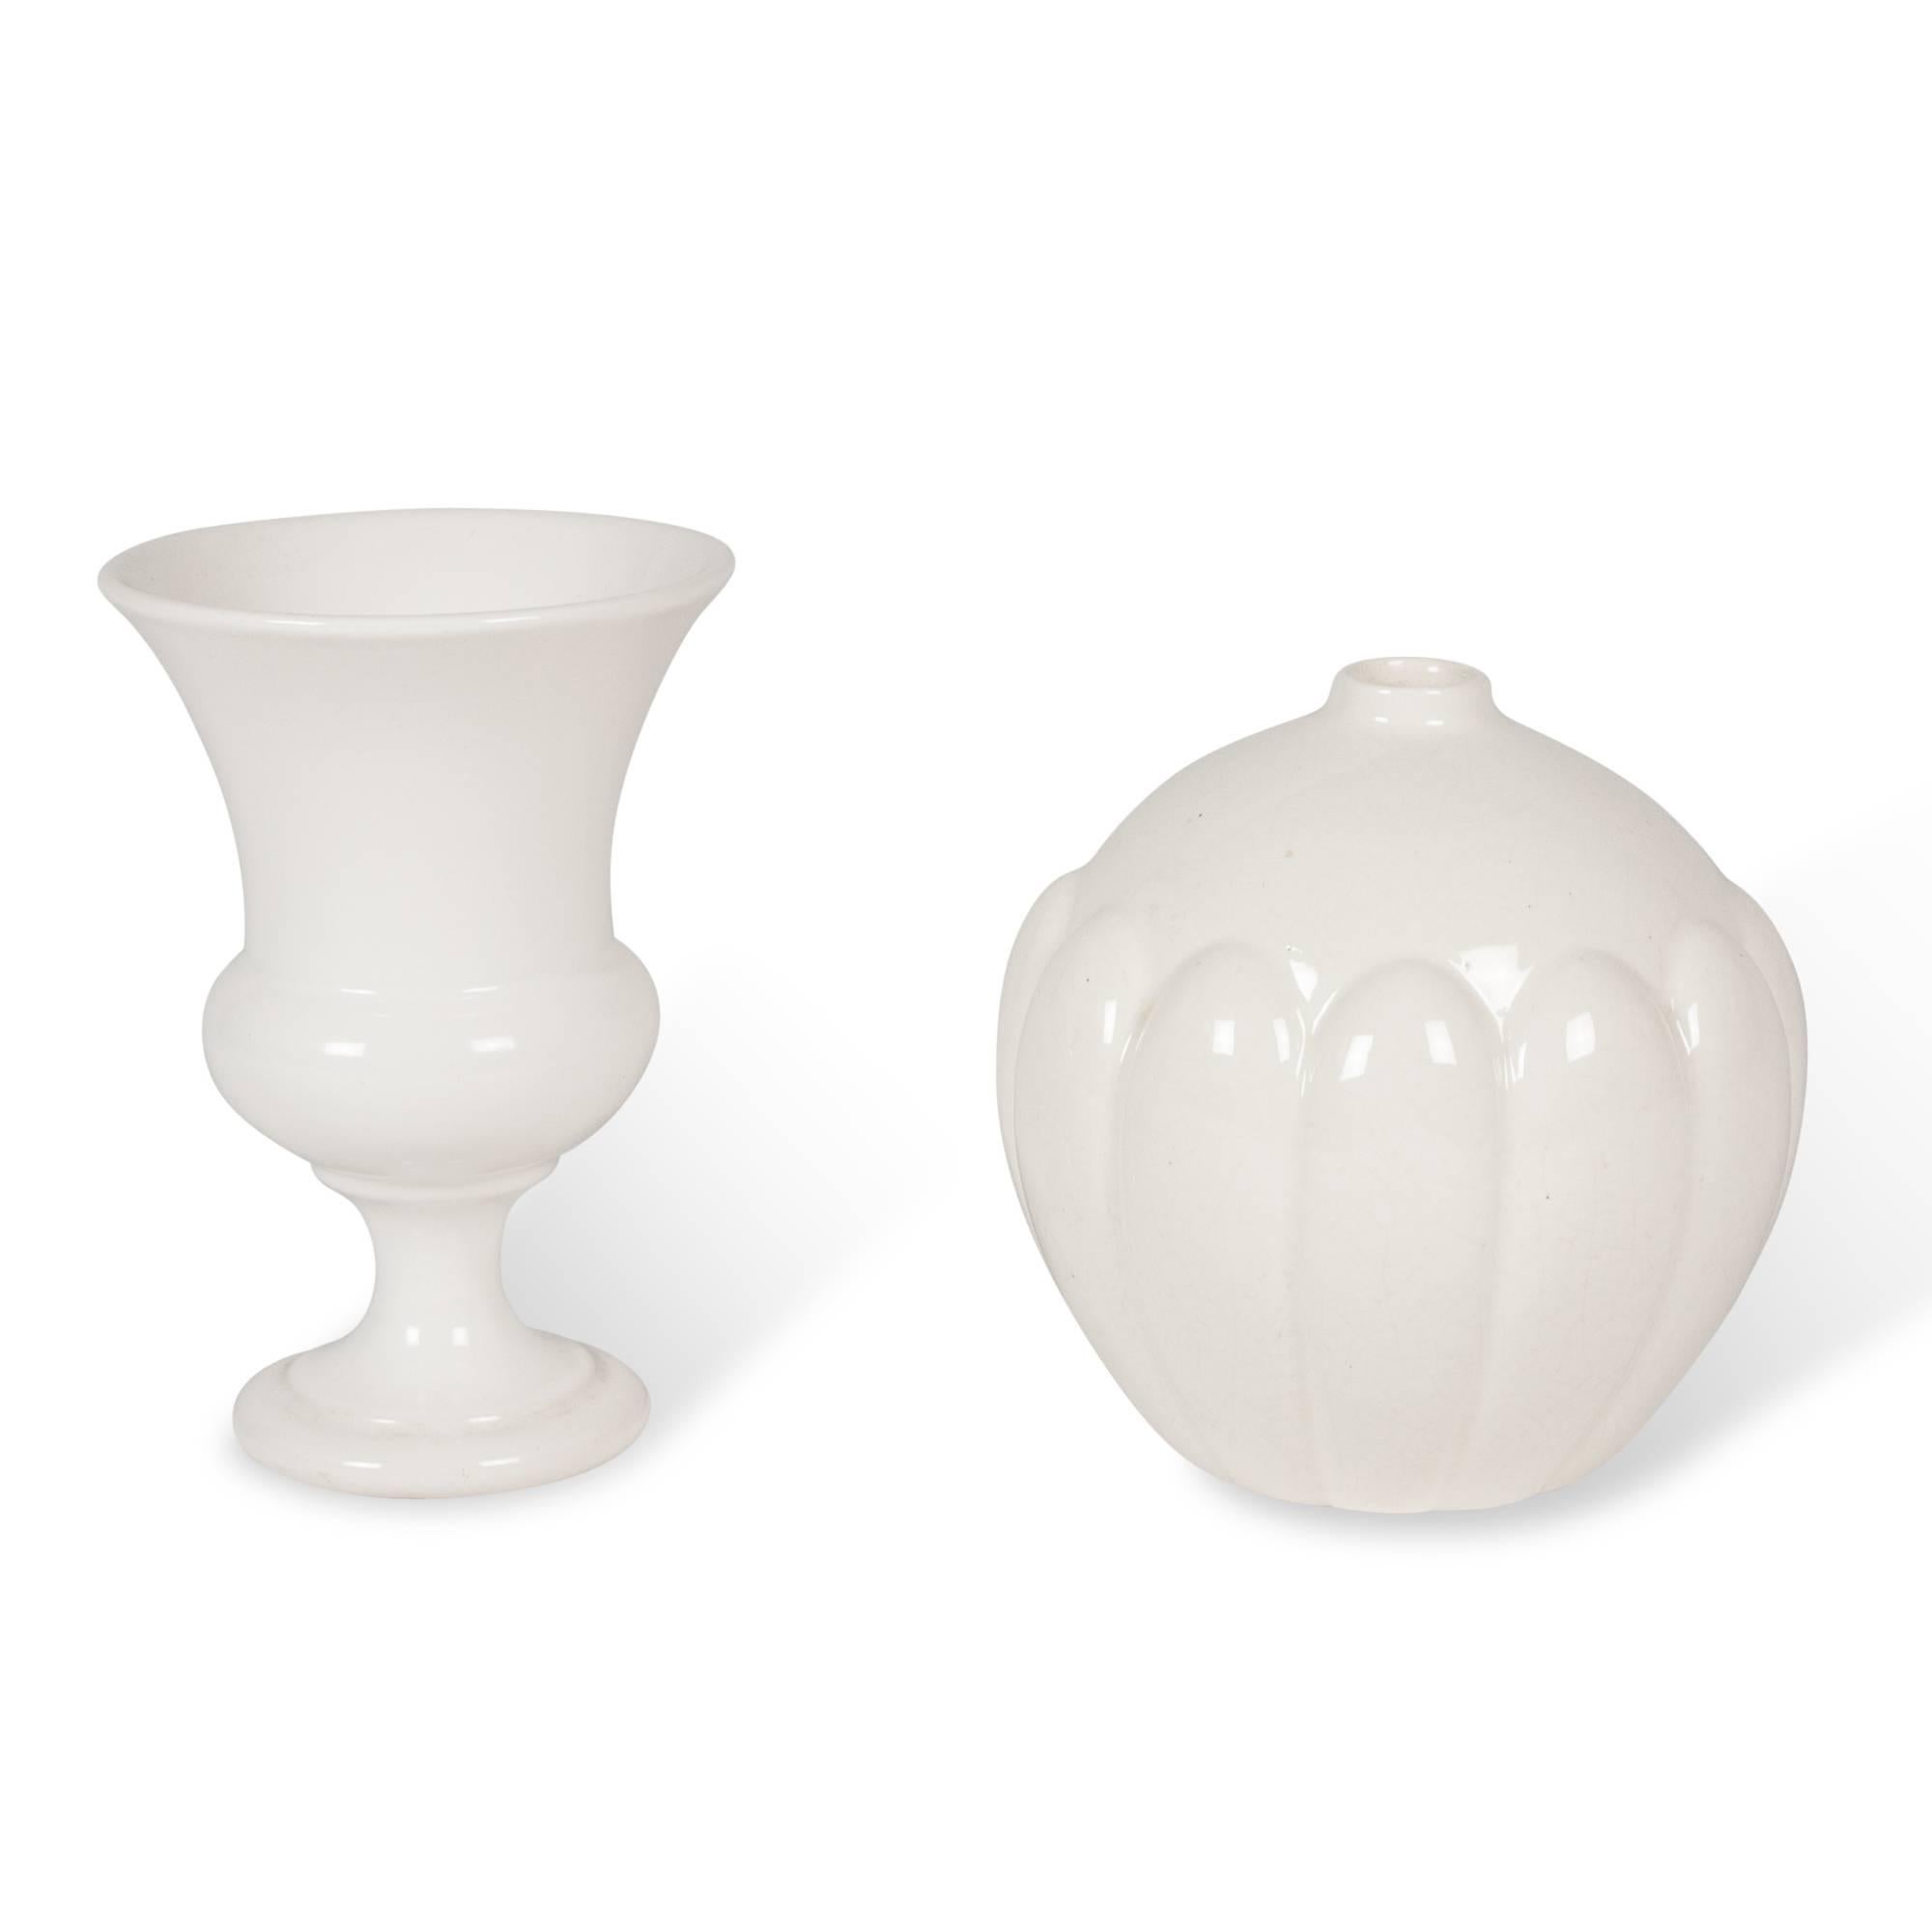 Set of two vases:
On left: White ceramic urn form vase, tapered open body on foot, by Pol Chambost, France, circa 1950. Signed to underside. Measures: Height 7 3/4 in, diameter of opening 5 in, diameter of base 3 1/2 in.
On right: Off-white